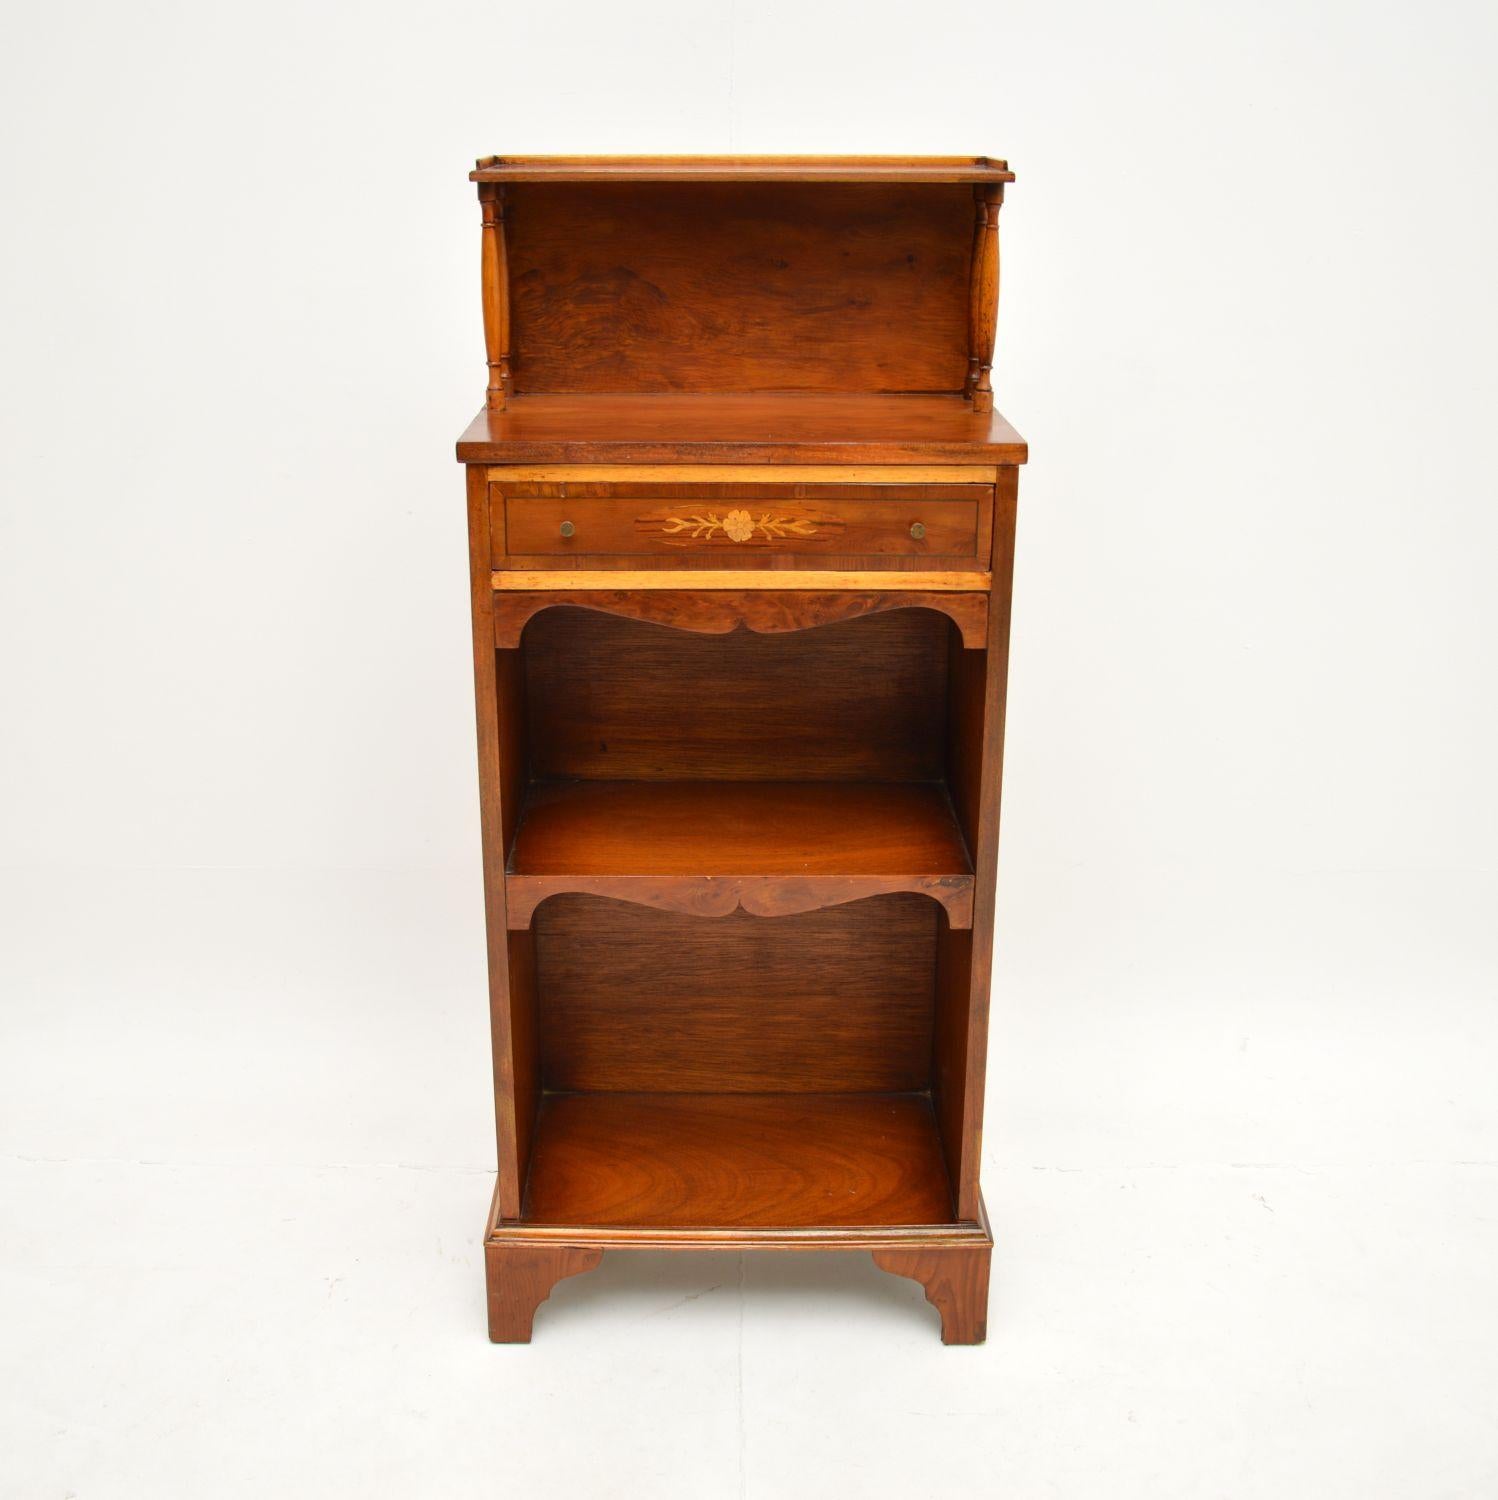 A smart and very useful antique inlaid yew wood open bookcase. This was made in England, it dates from around the 1950’s.

It is very well made and is a great size, slim and narrow with plenty of storage space. The yew wood has a gorgeous colour and